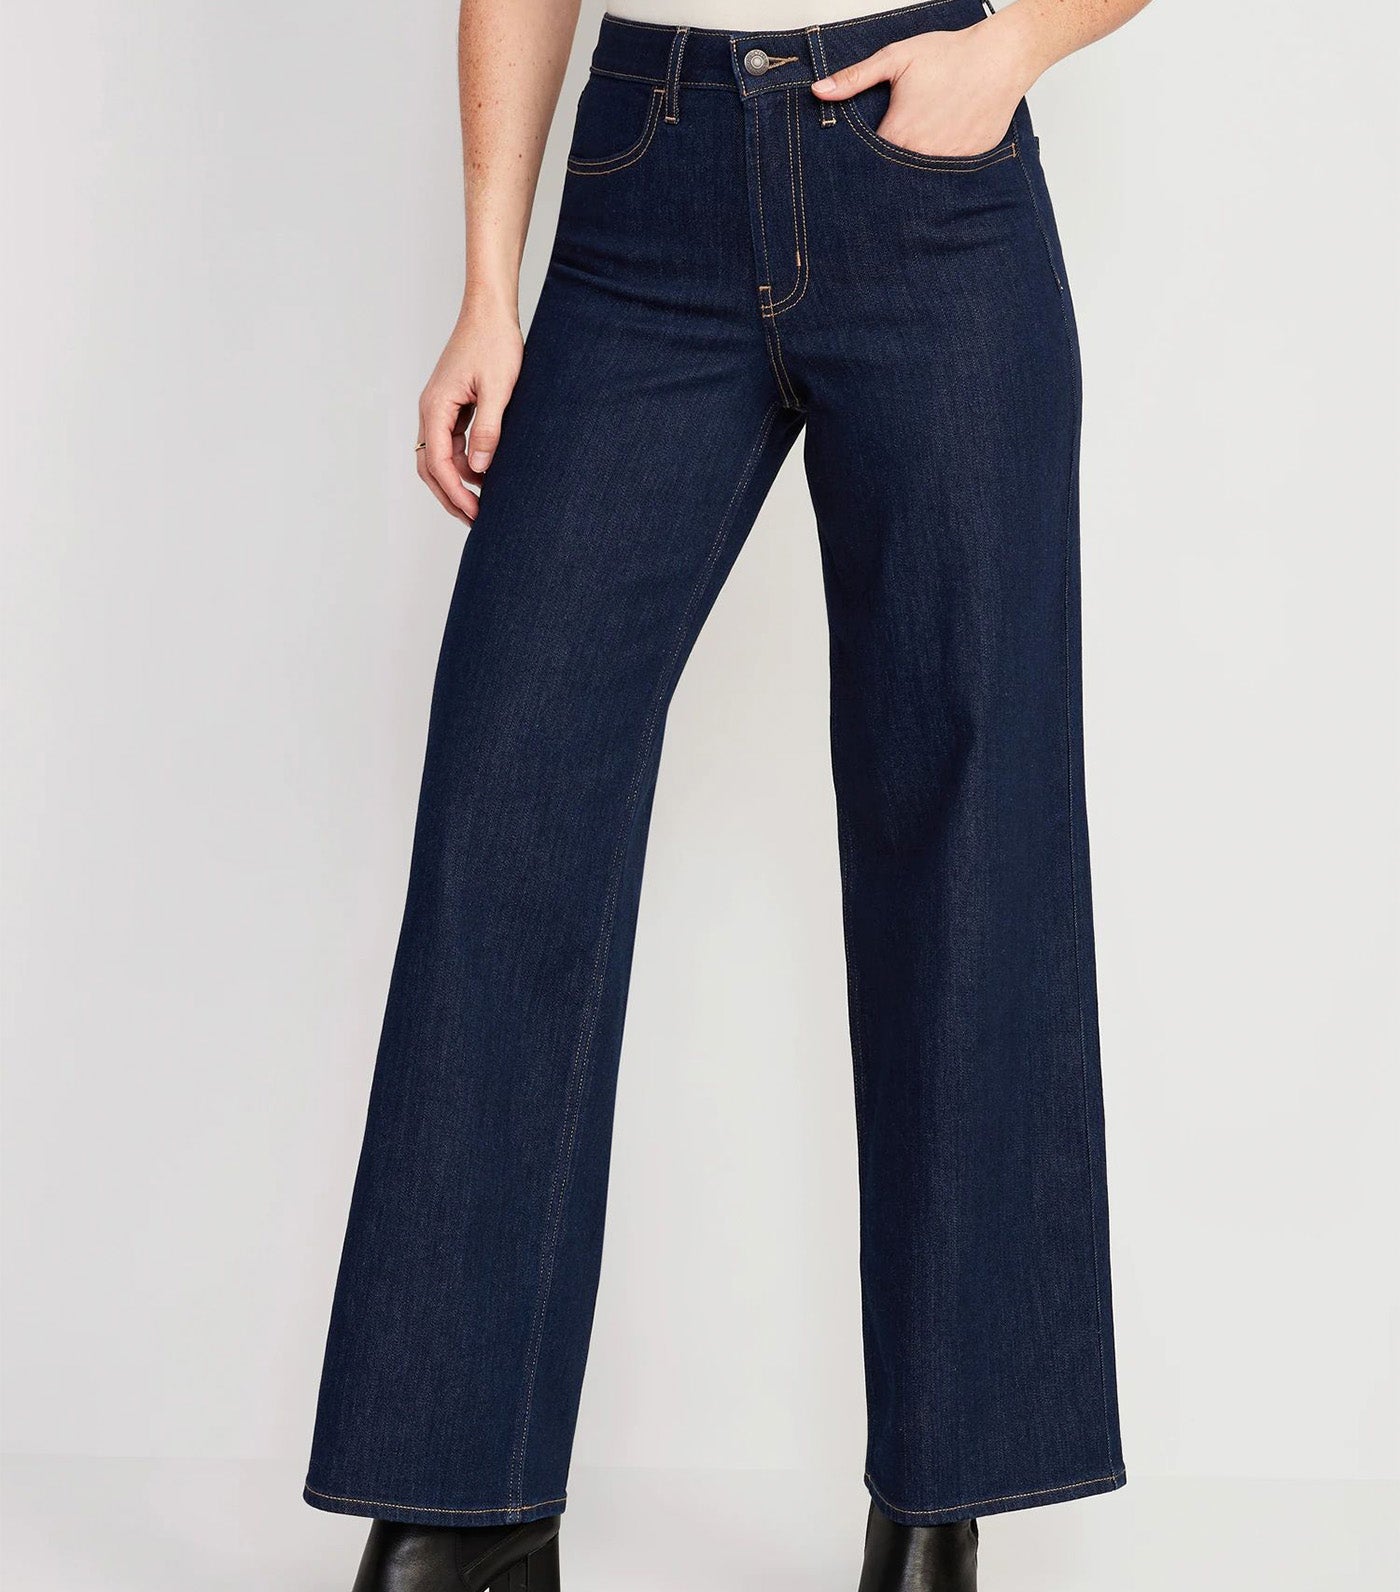 High-Waisted Wow Wide-Leg Jeans for Women Rinse